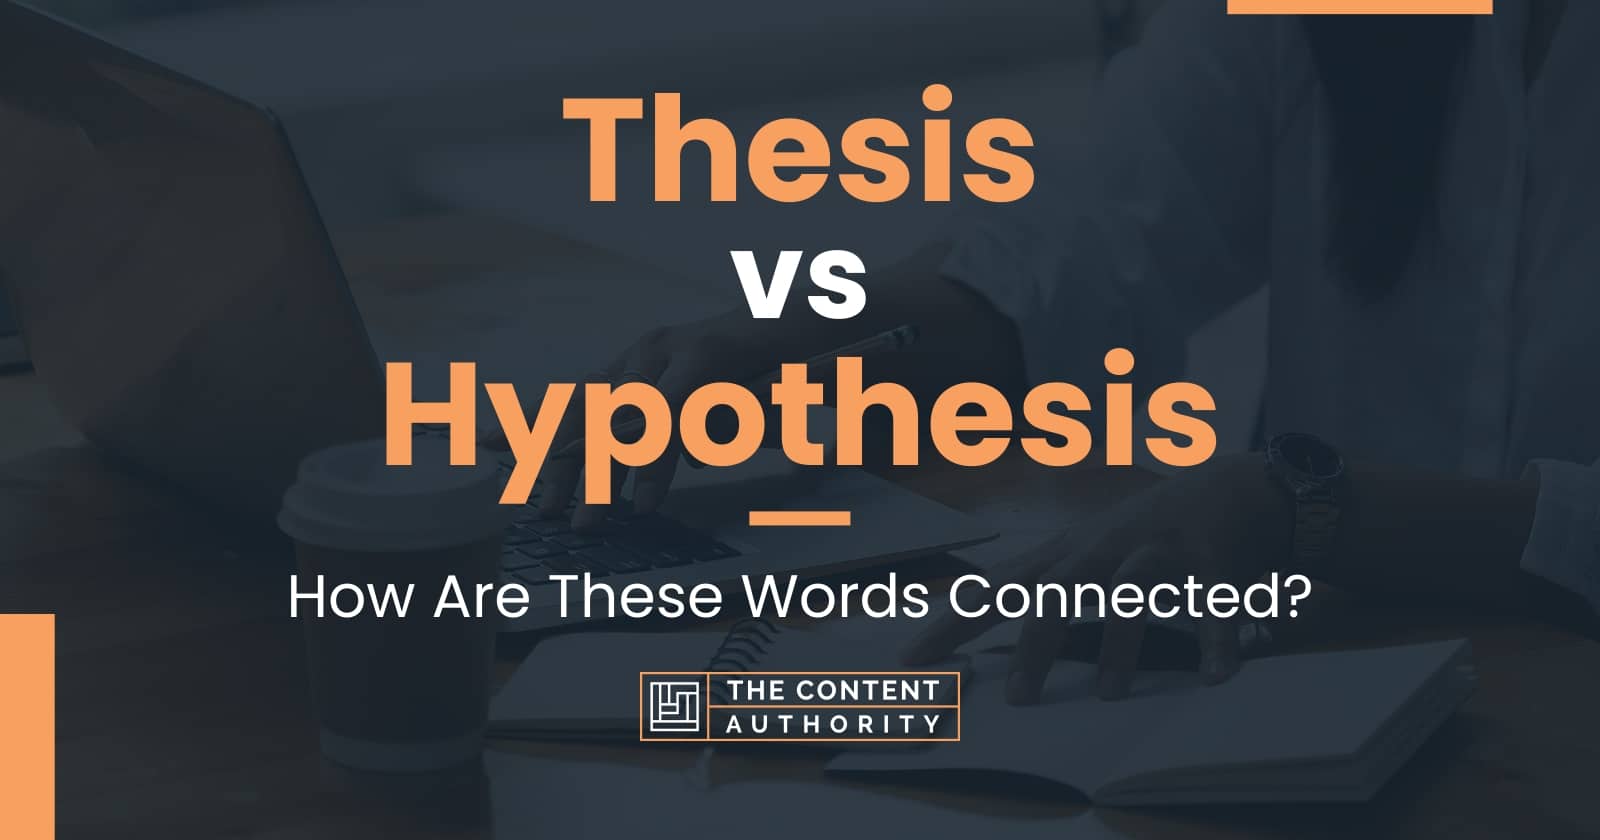 hypothesis vs thesis meaning